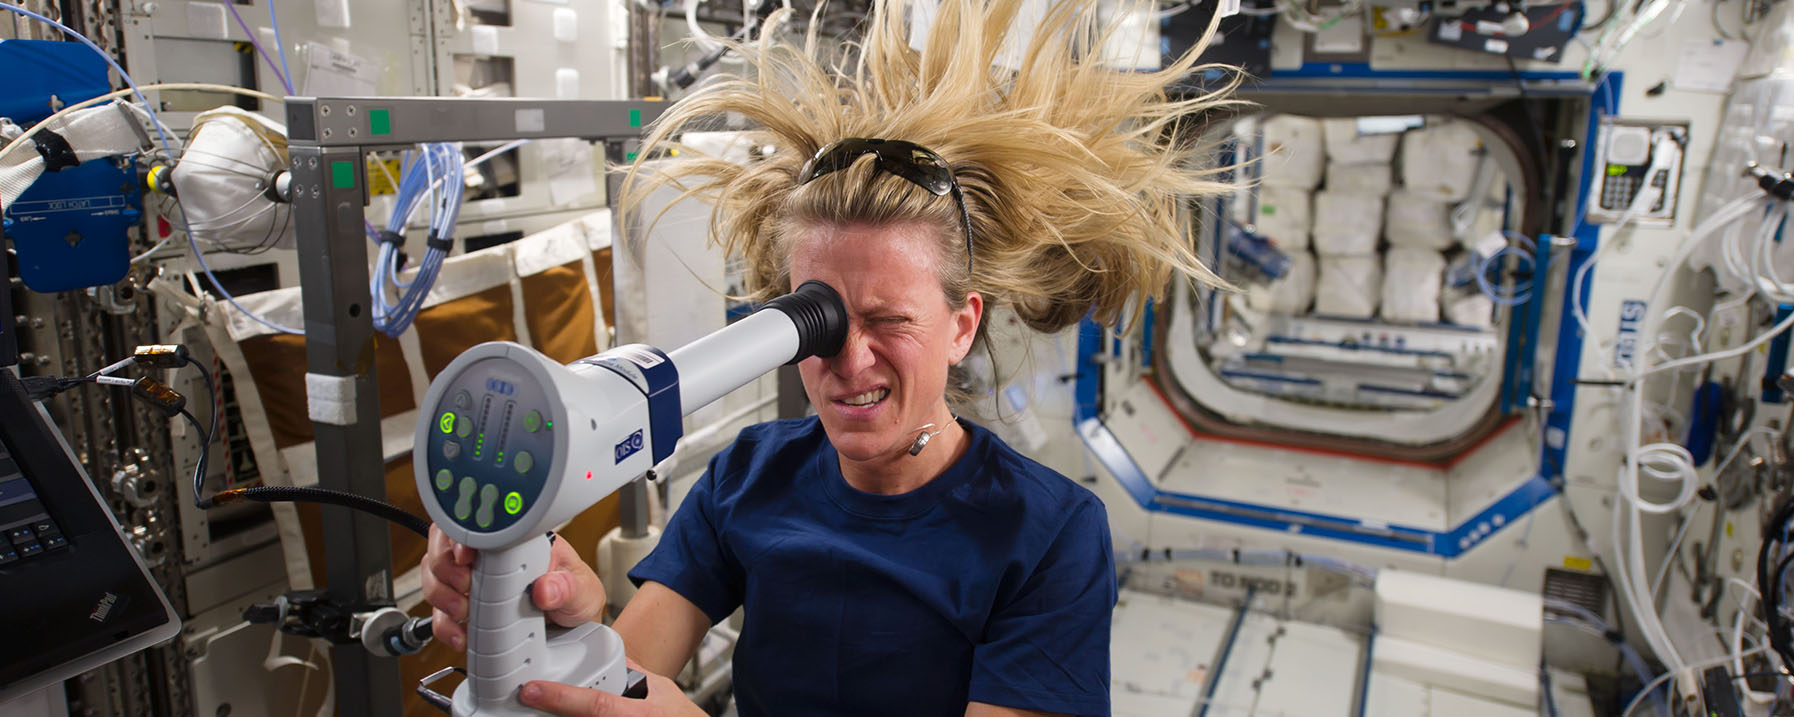 Astronaut Karen Nyberg Uses a Tool to Study Her Eyes on Space